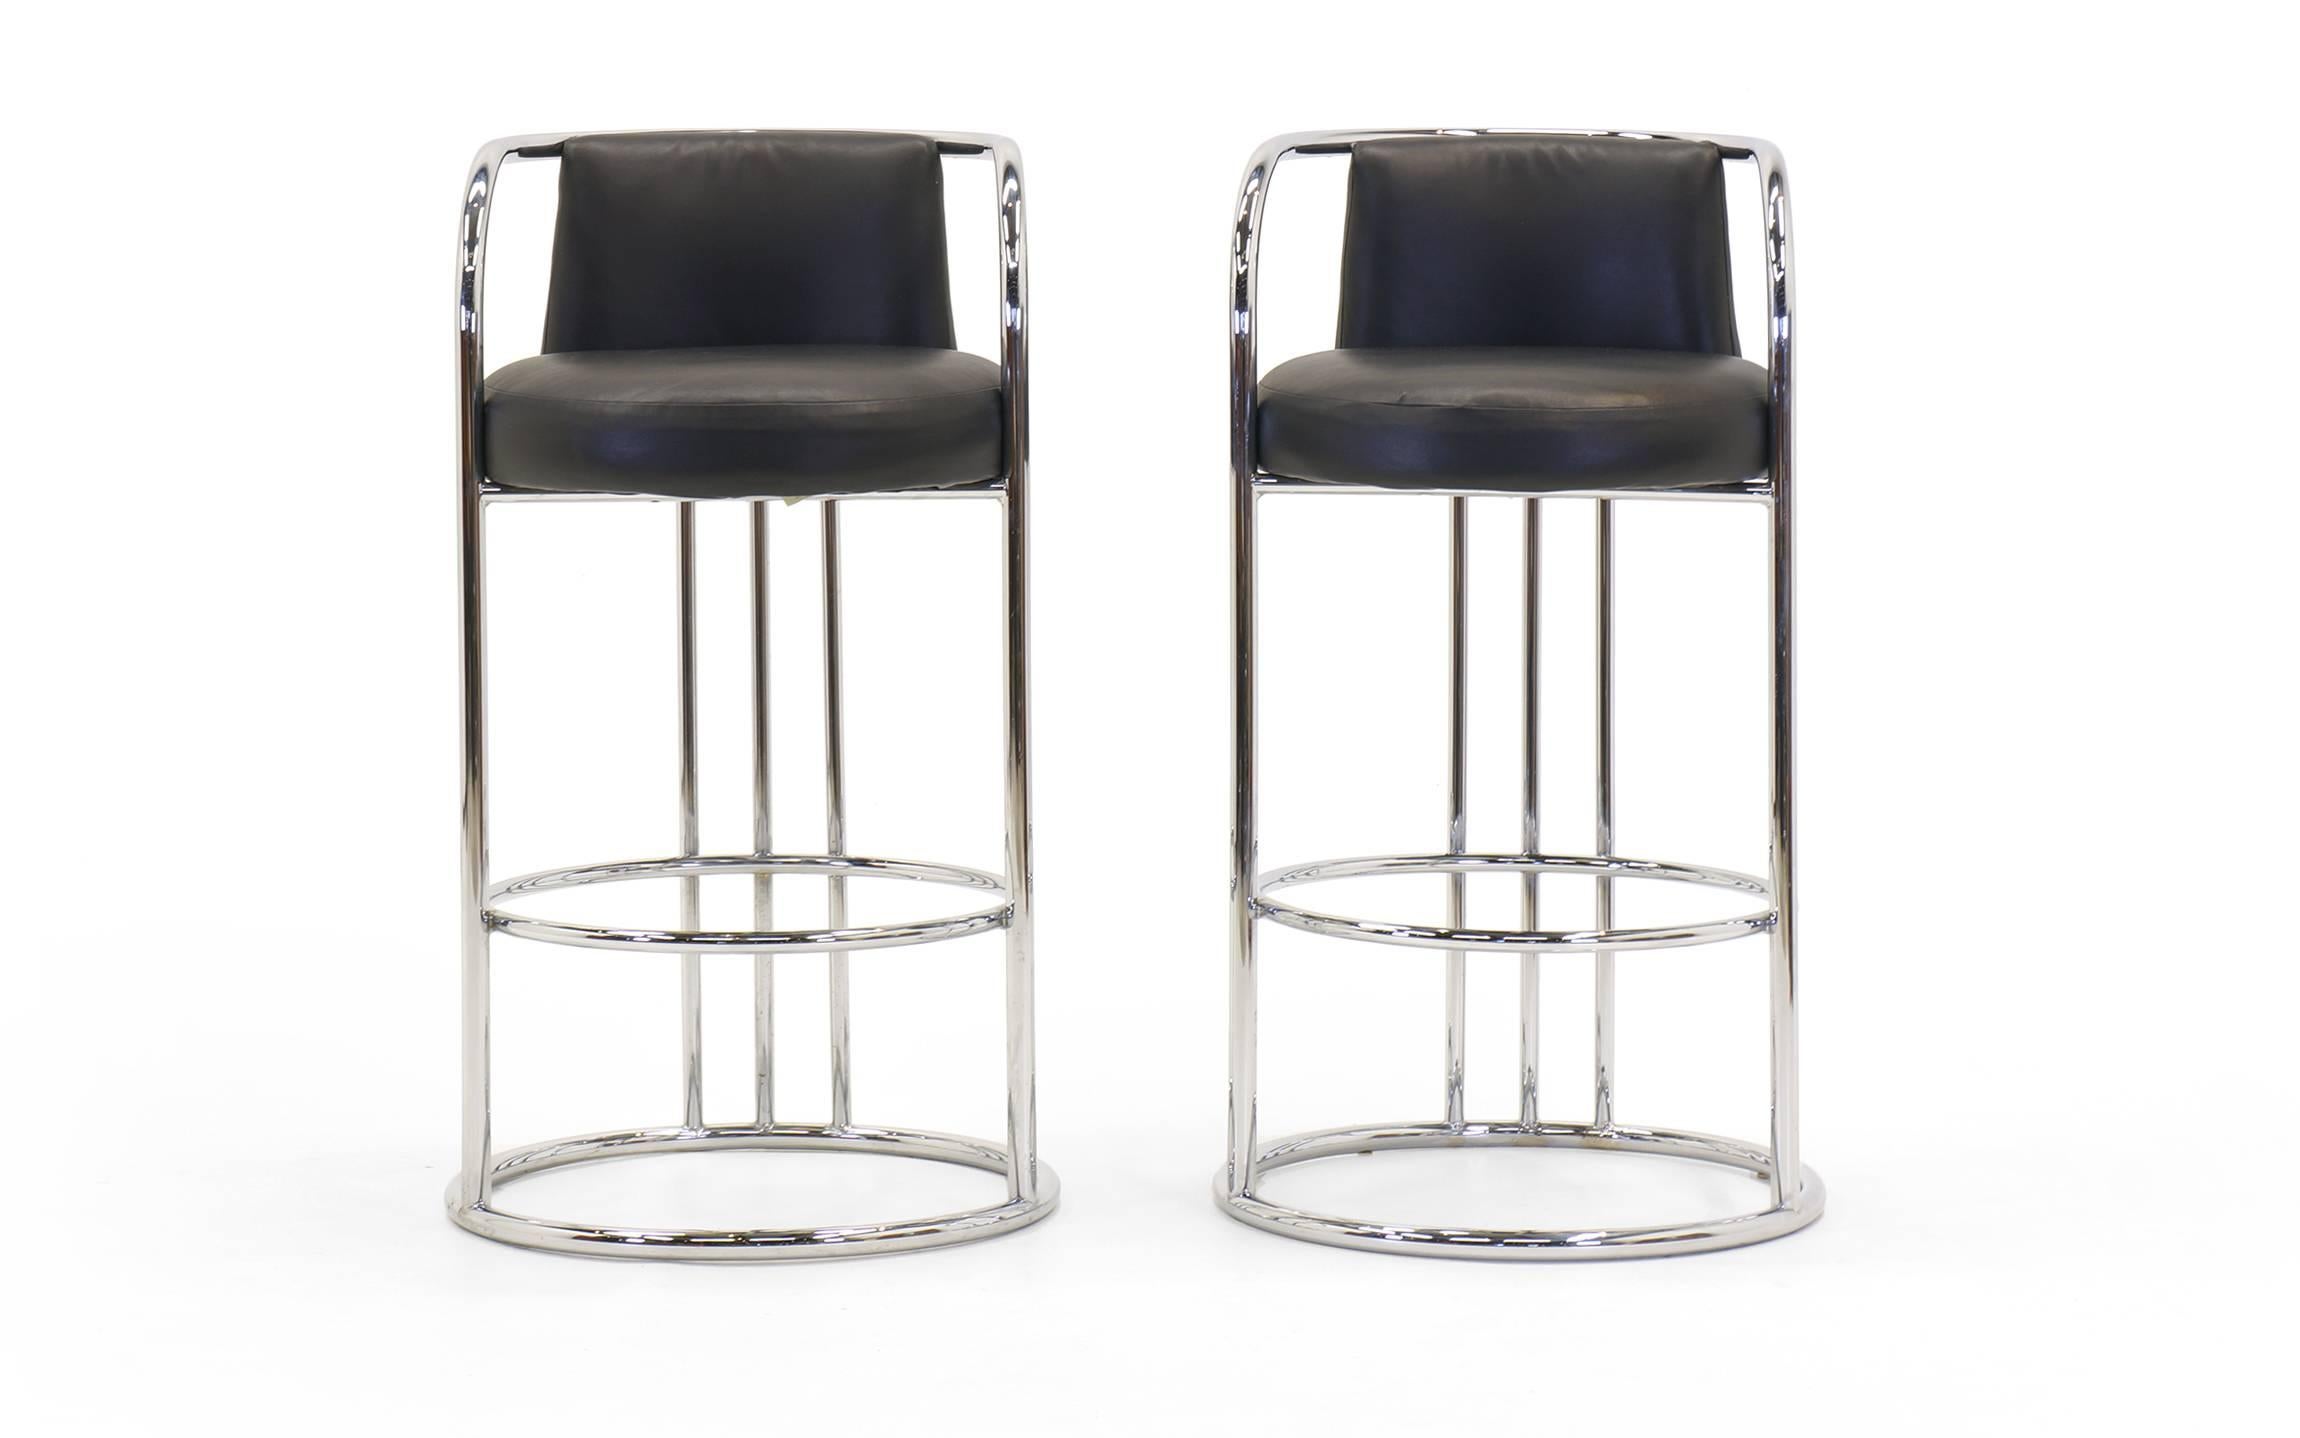 Mid-Century Modern Milo Baughman for Thayer Coggin Chrome and Black Bar Stools, Five Total, Signed